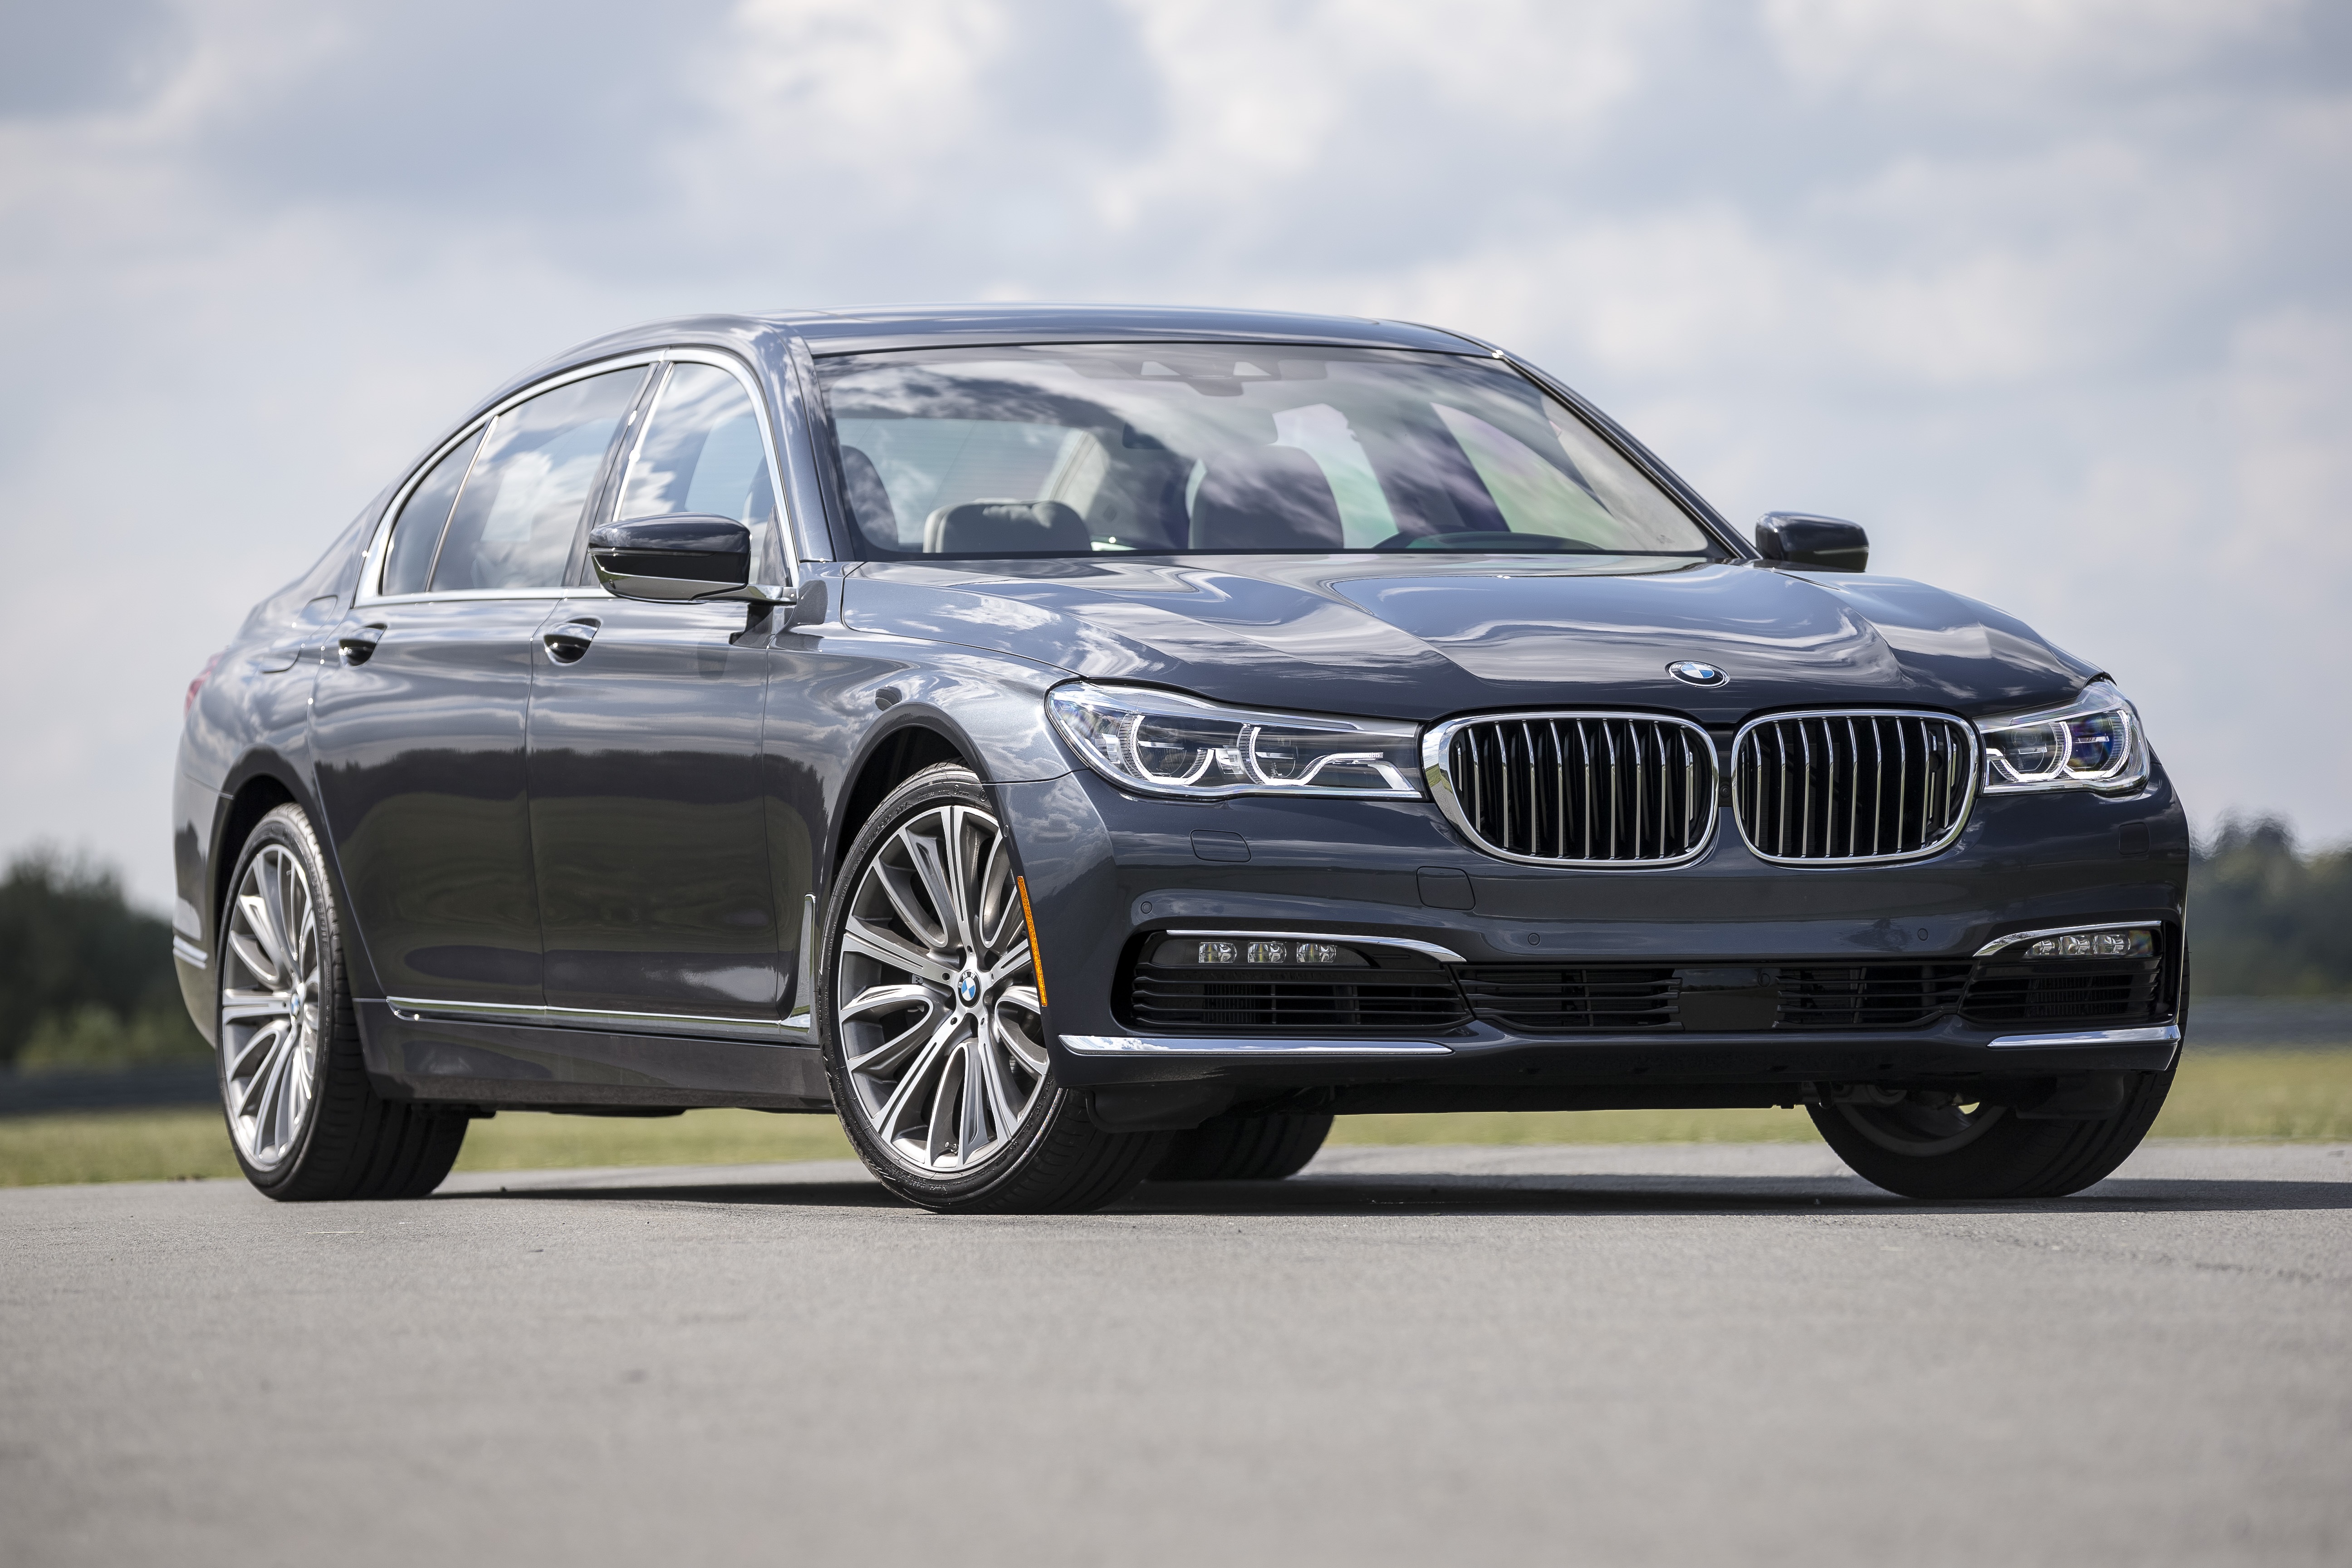 The Ultimate Luxury: The 2016 BMW 7 Series